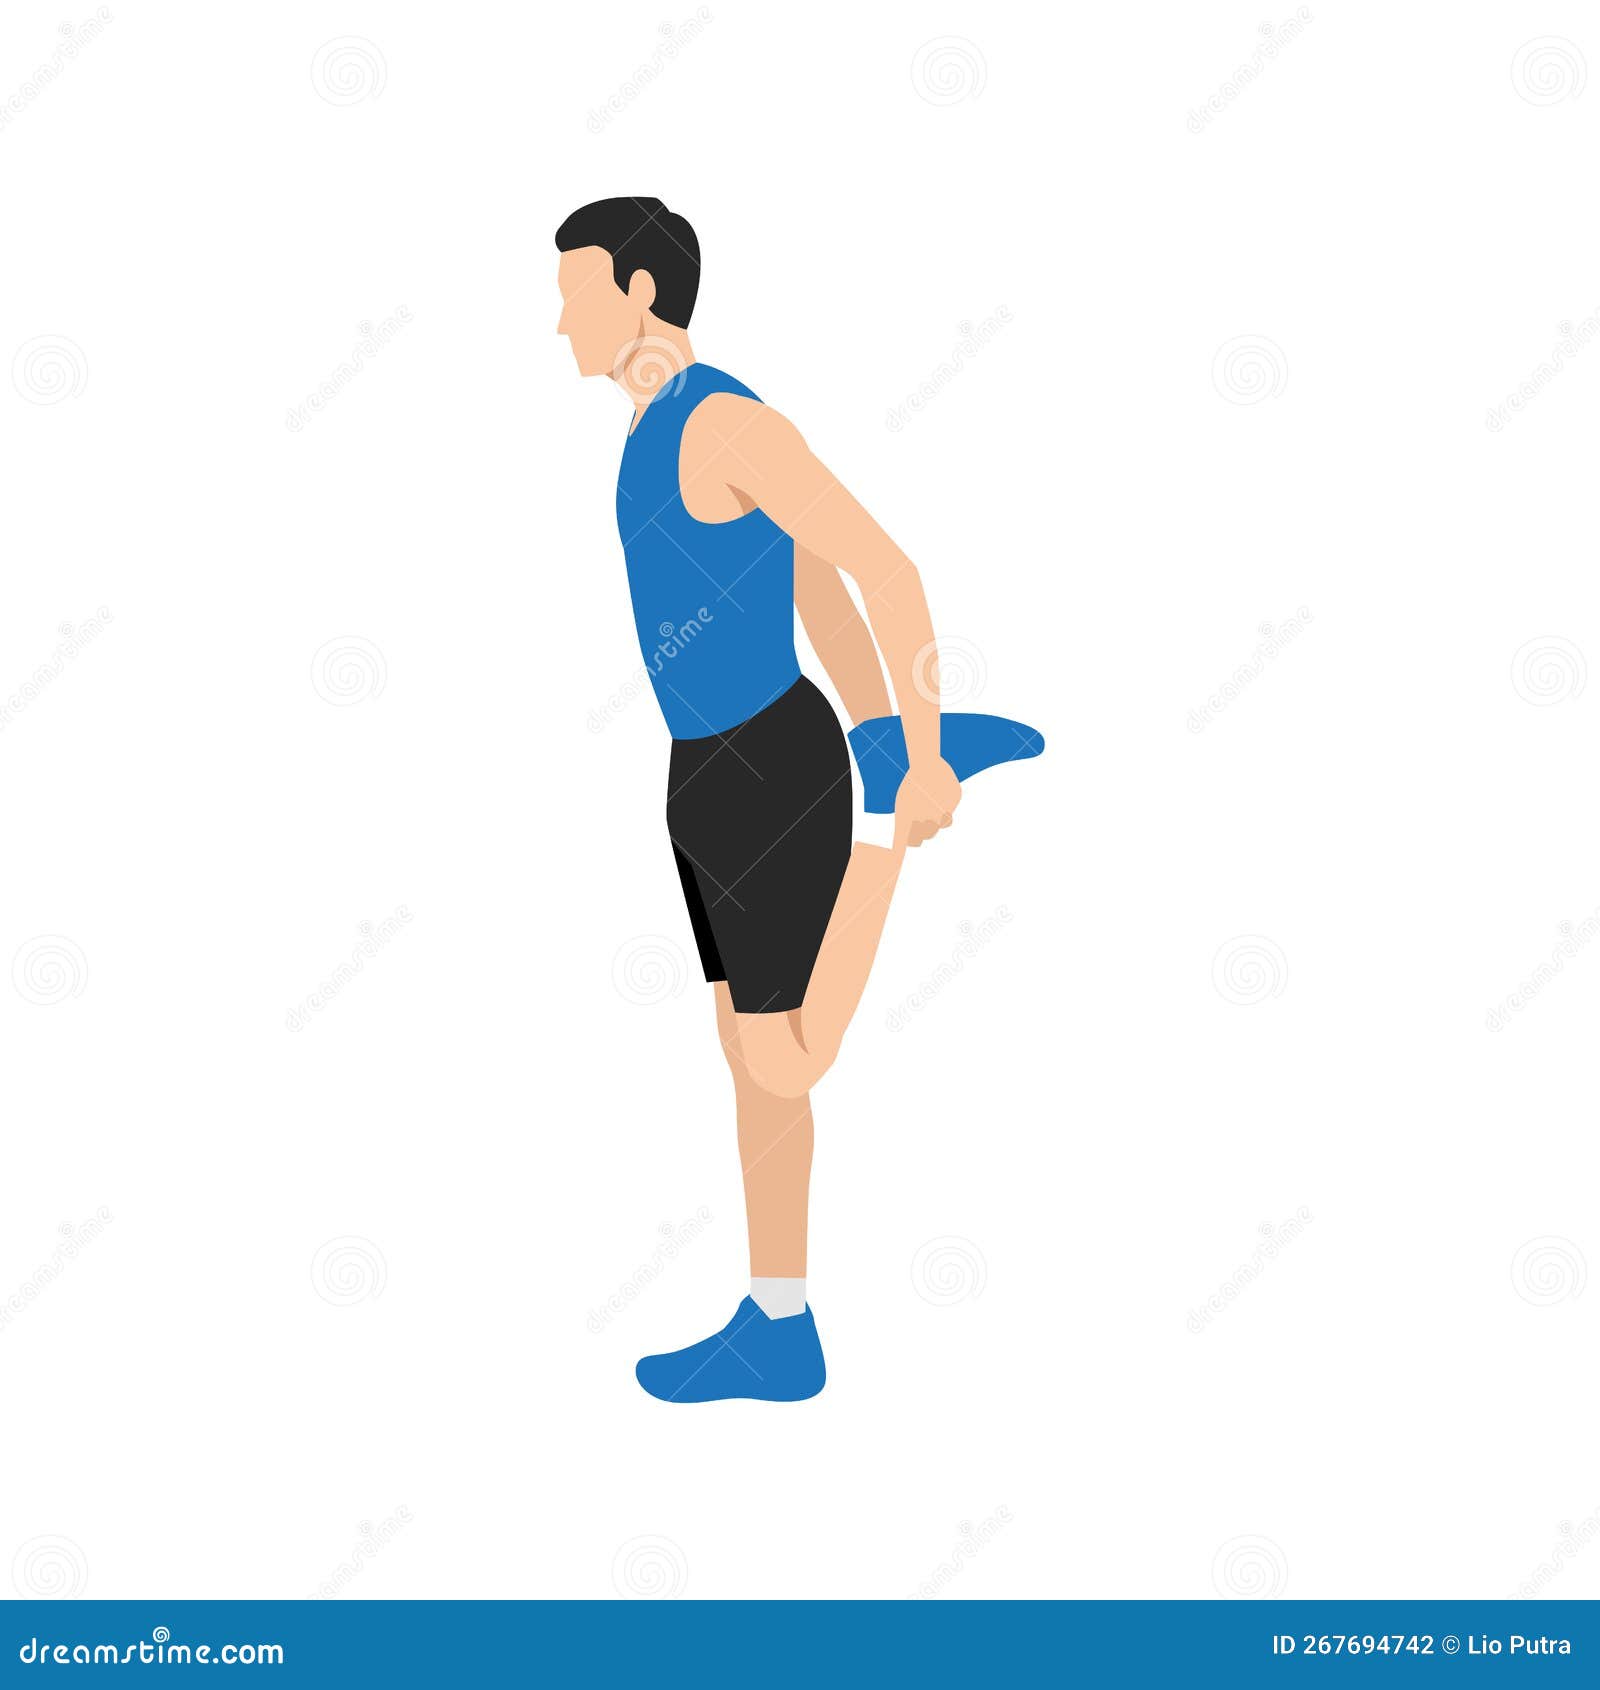 Exercise Diagram About Quadriceps Stretch While Standing Stock Illustration  - Download Image Now - iStock